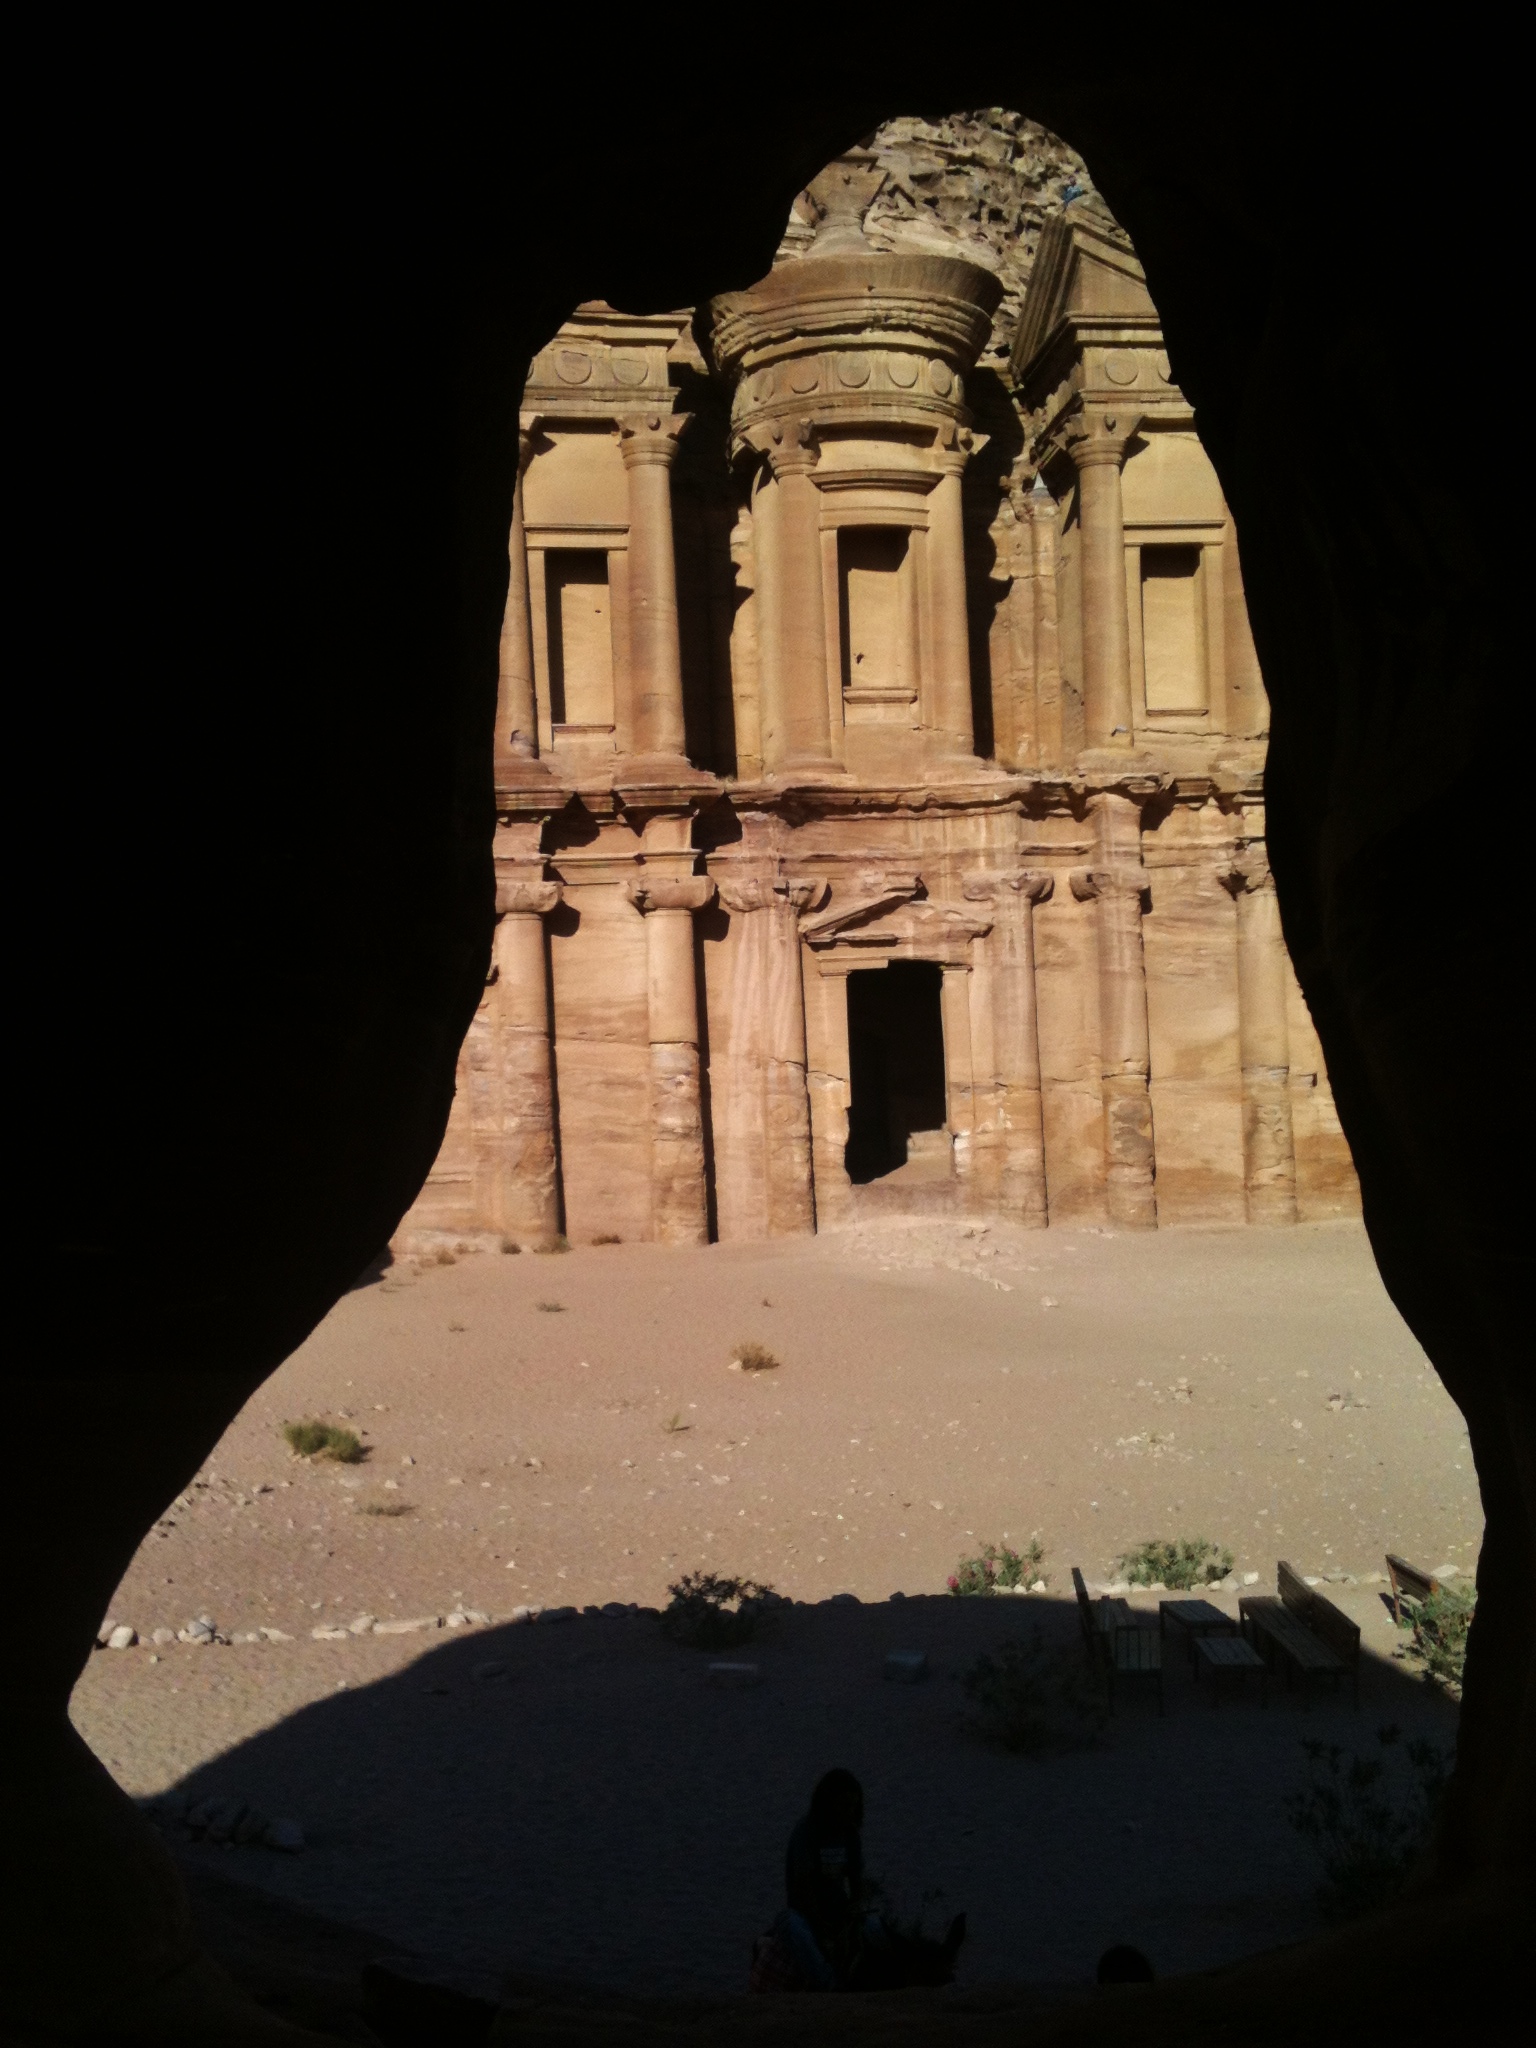 Living in a cave in Petra